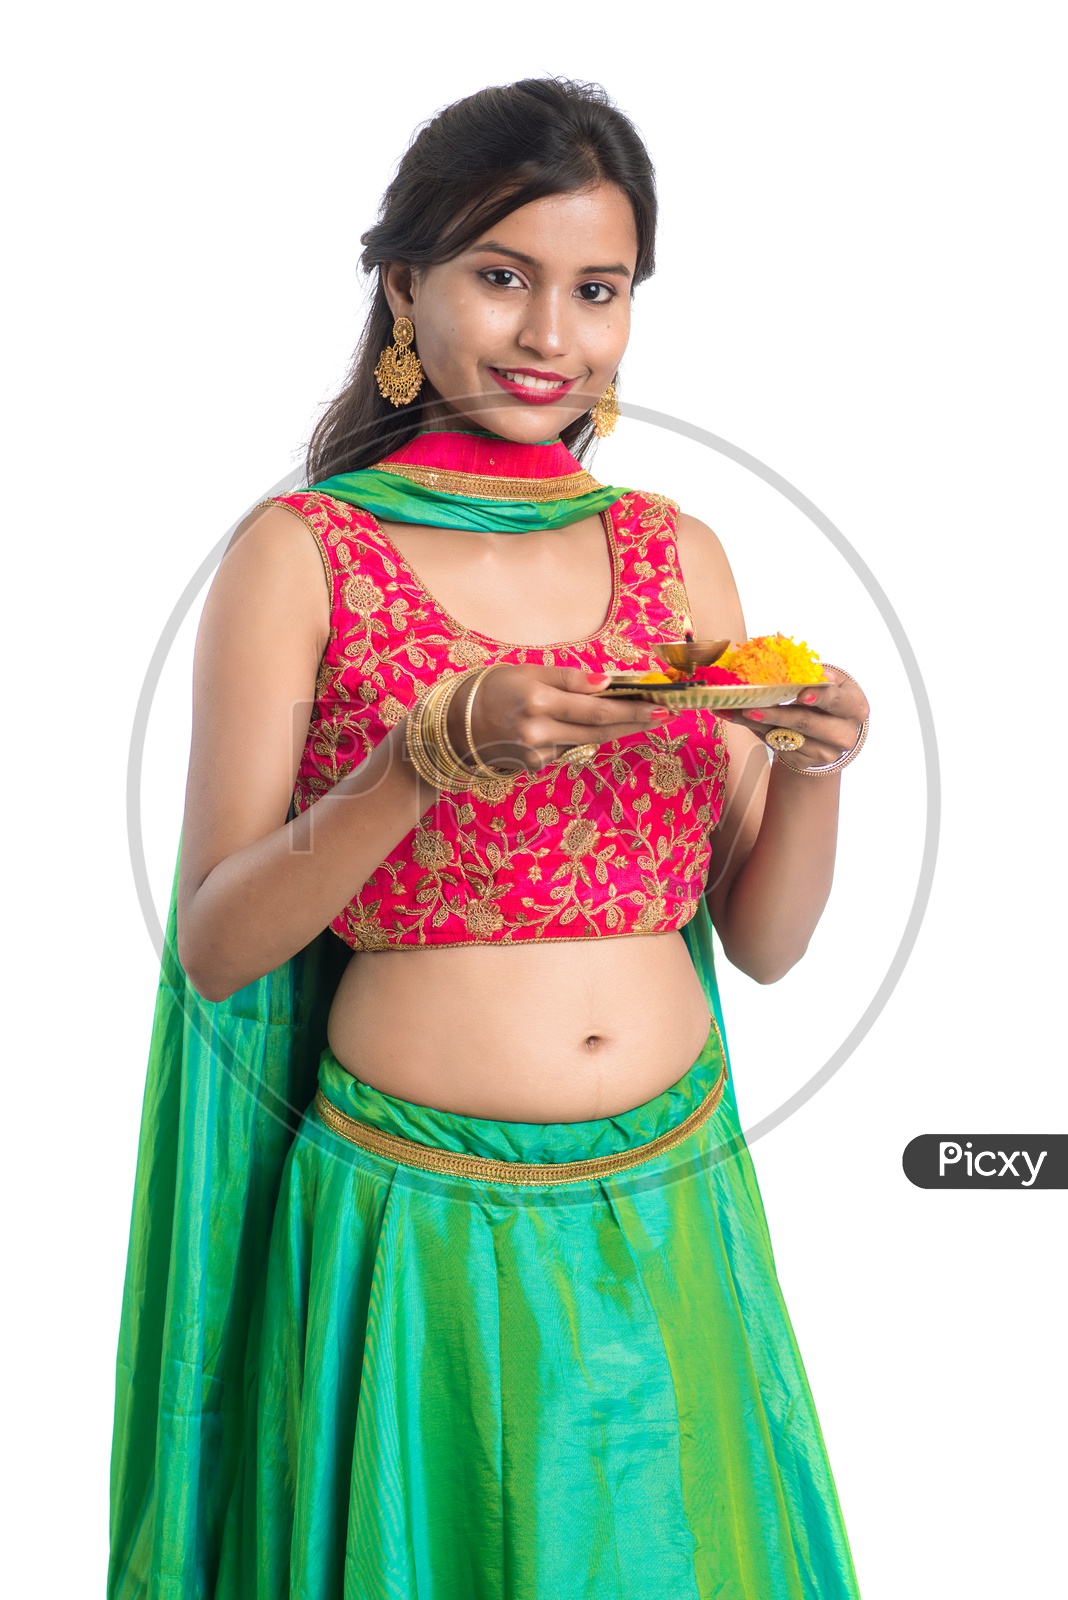 Portrait Of a Young India Traditional Woman  Holding Pooja Plate Or Dia  in Hand  Over a White  Background